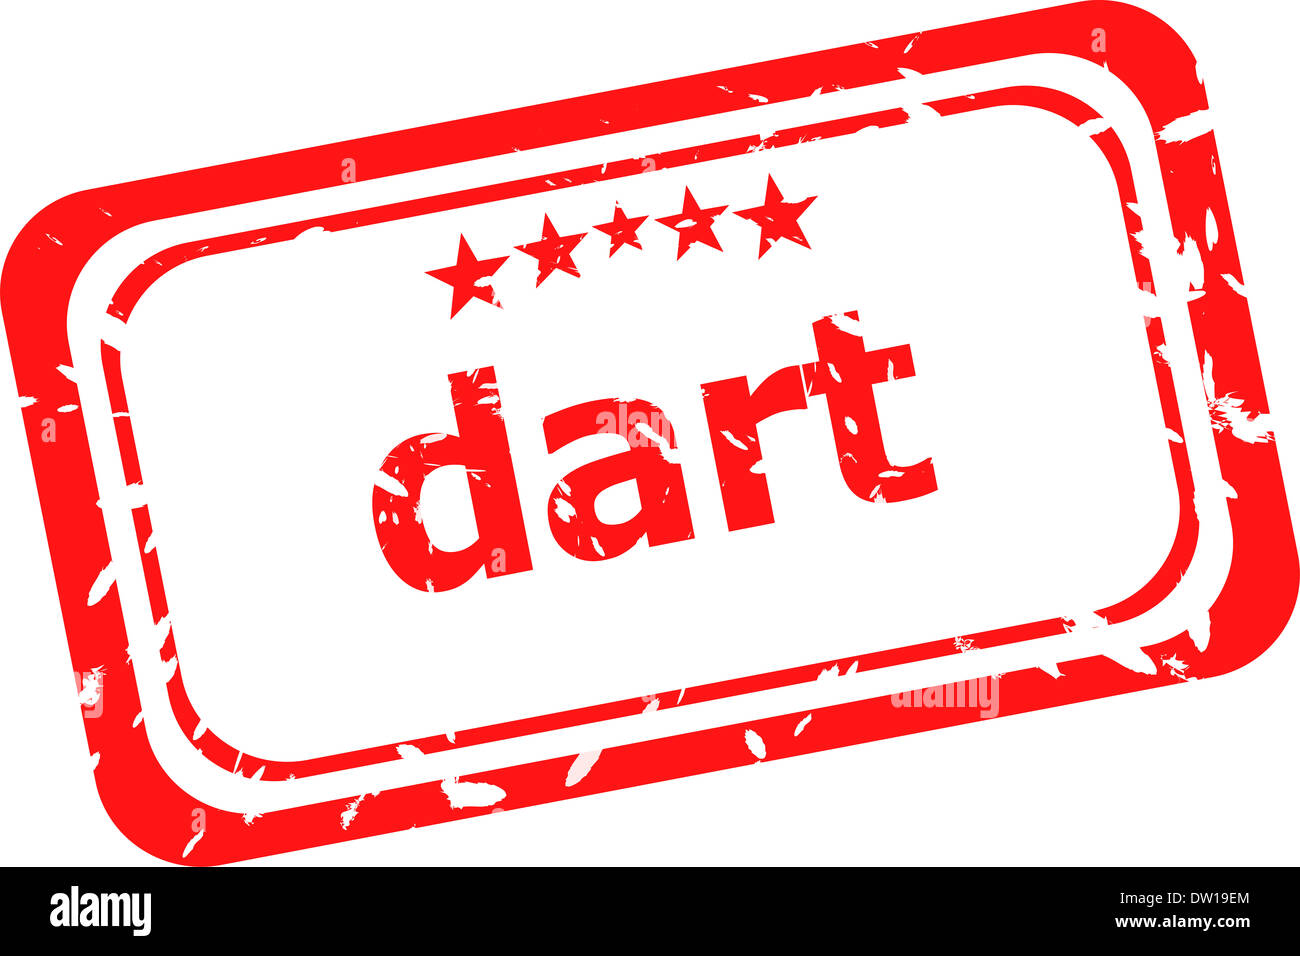 dart word on red rubber old business stamp Stock Photo